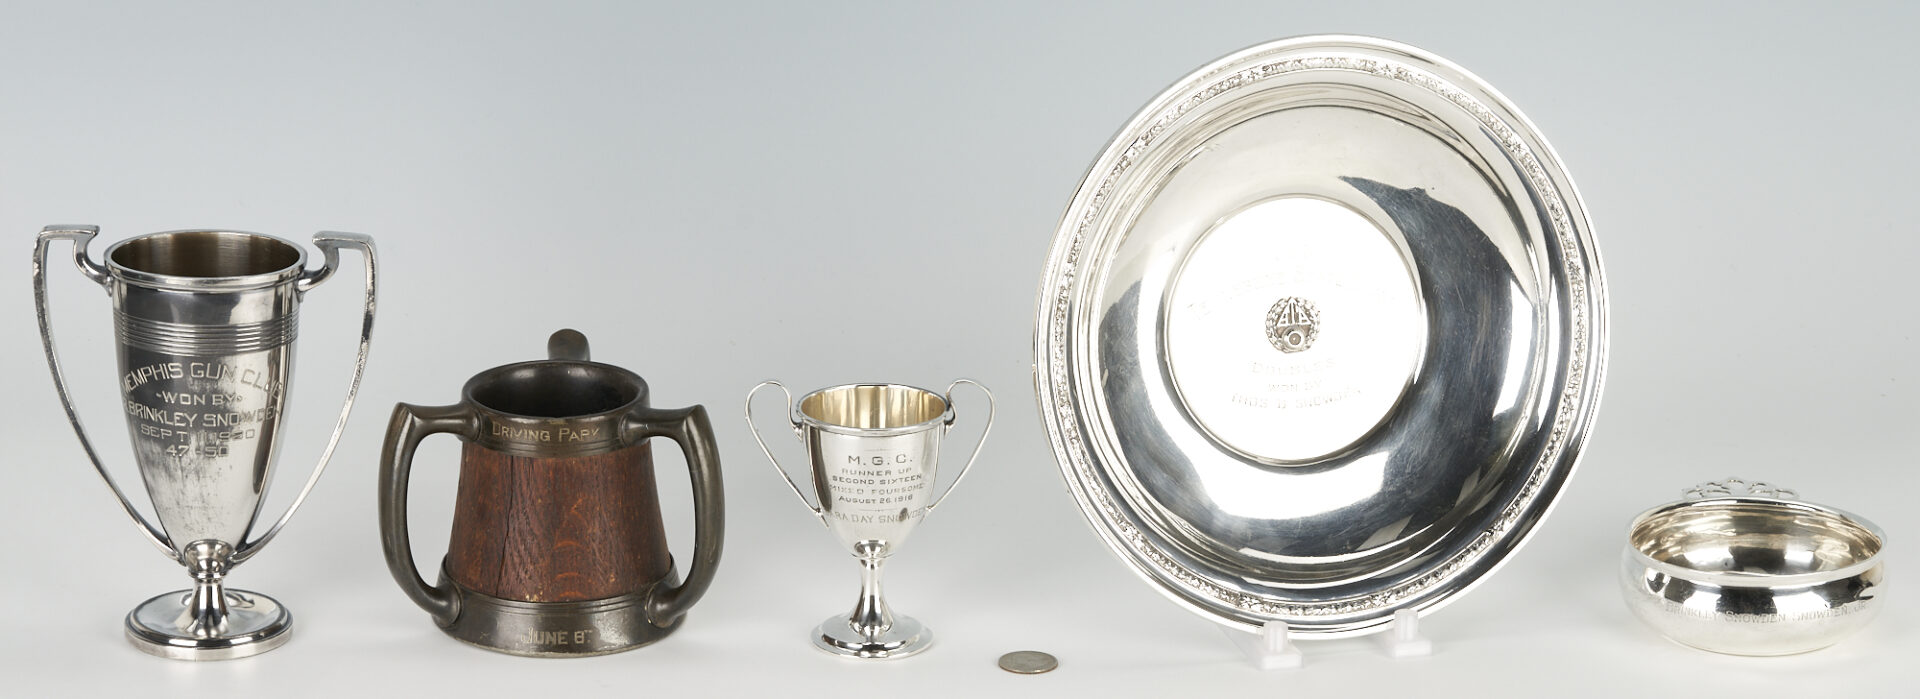 Lot 251: 5 Antique Trophies incl. Sterling Silver, Snowden Family Provenance